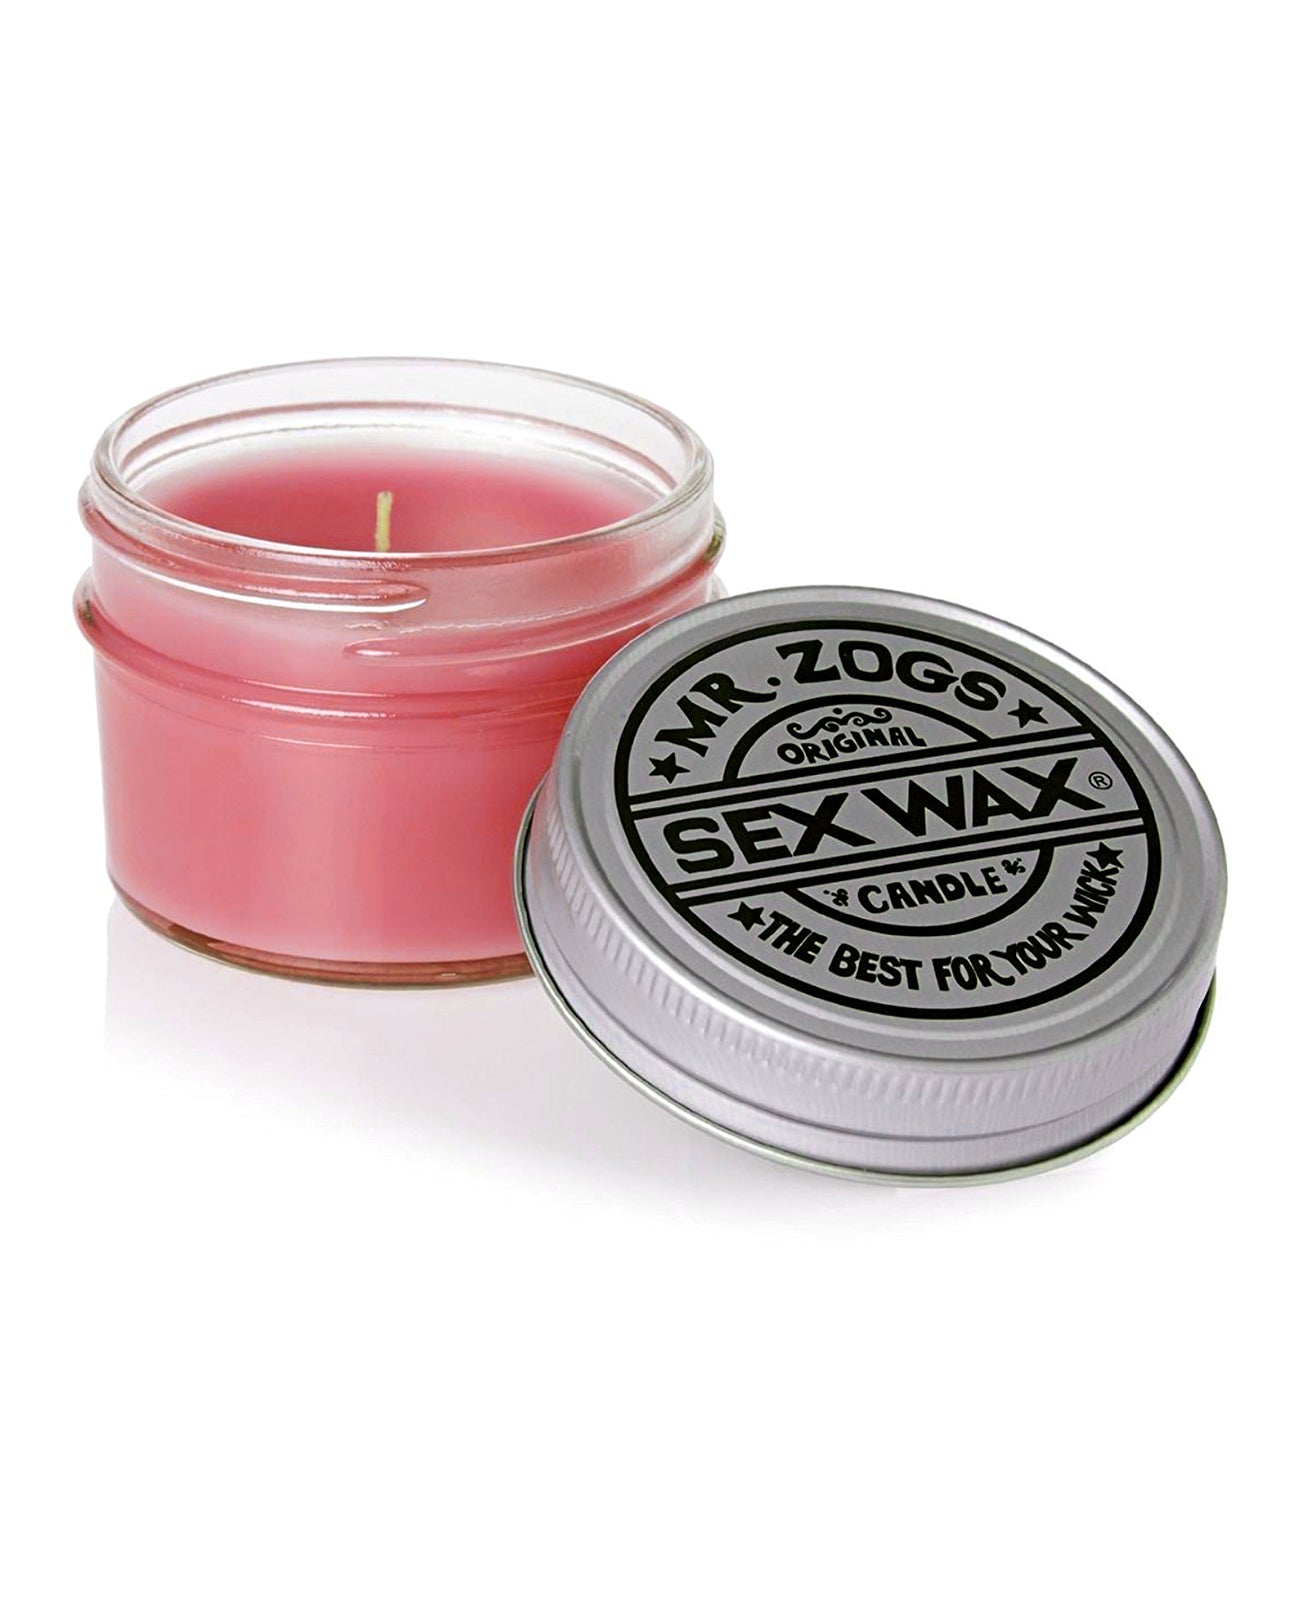 SEXWAX Scented Candles